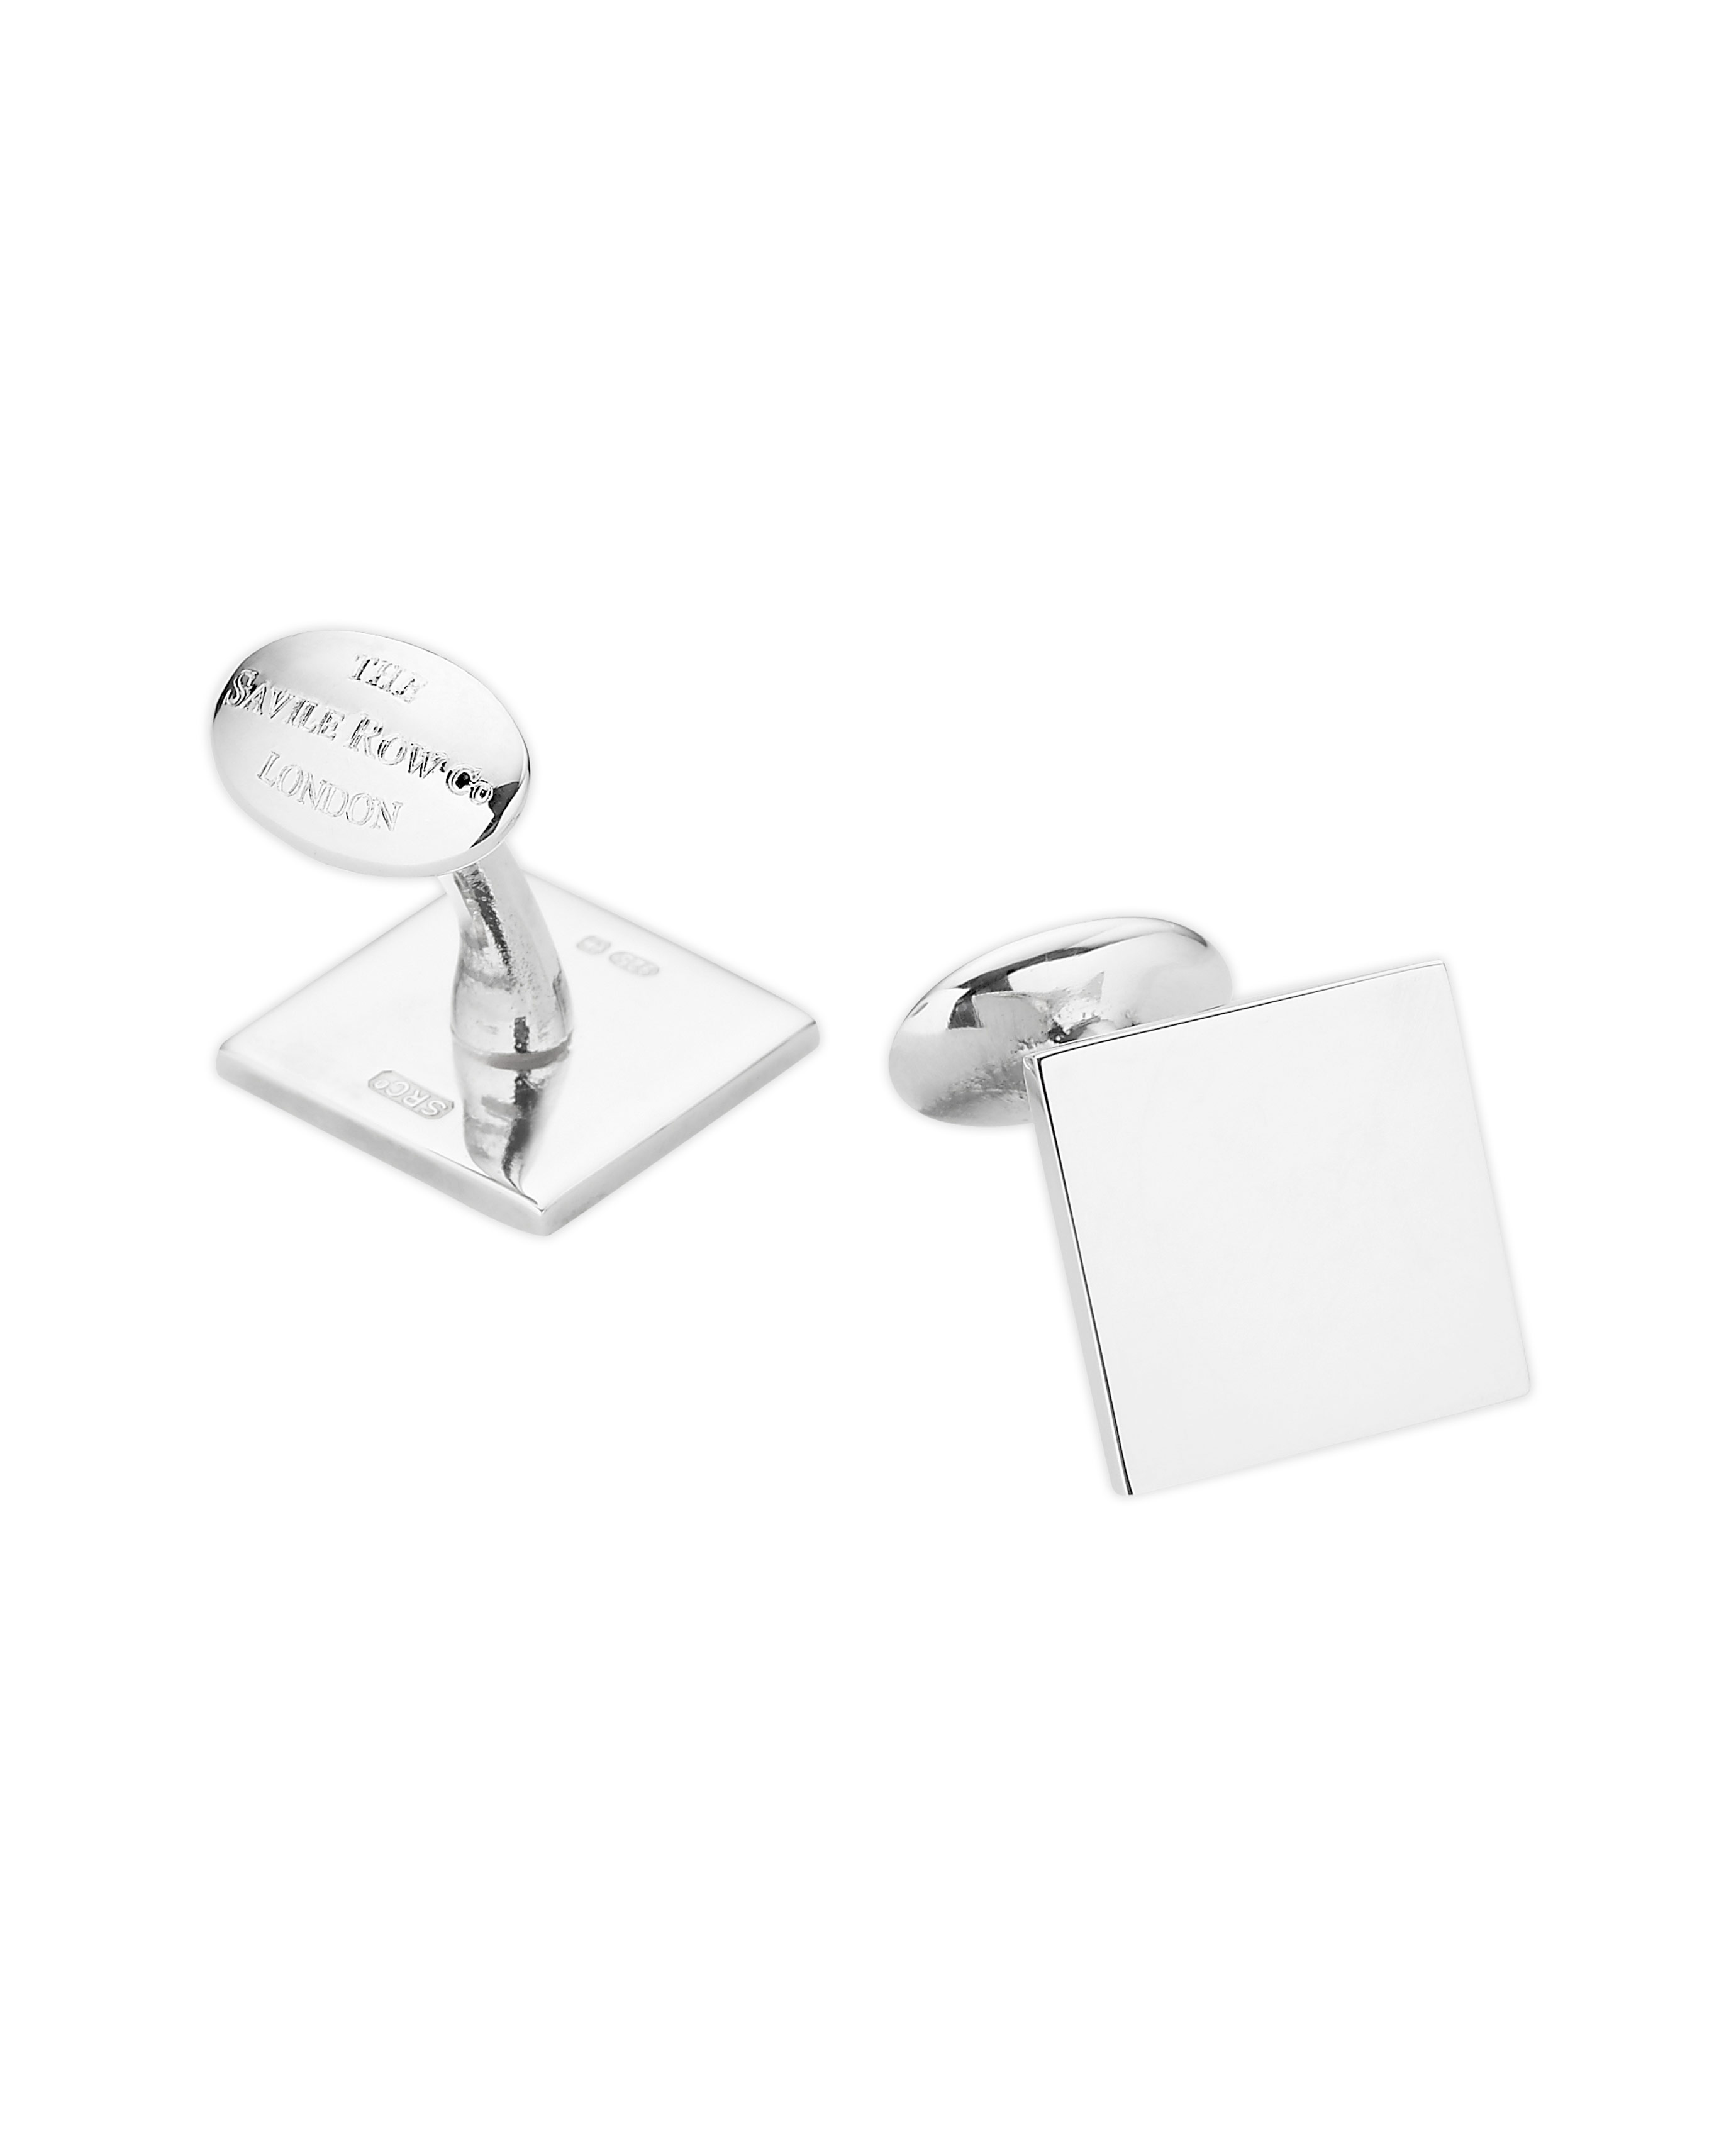 Savile Row Company Engravable Sterling Silver Square Cufflinks